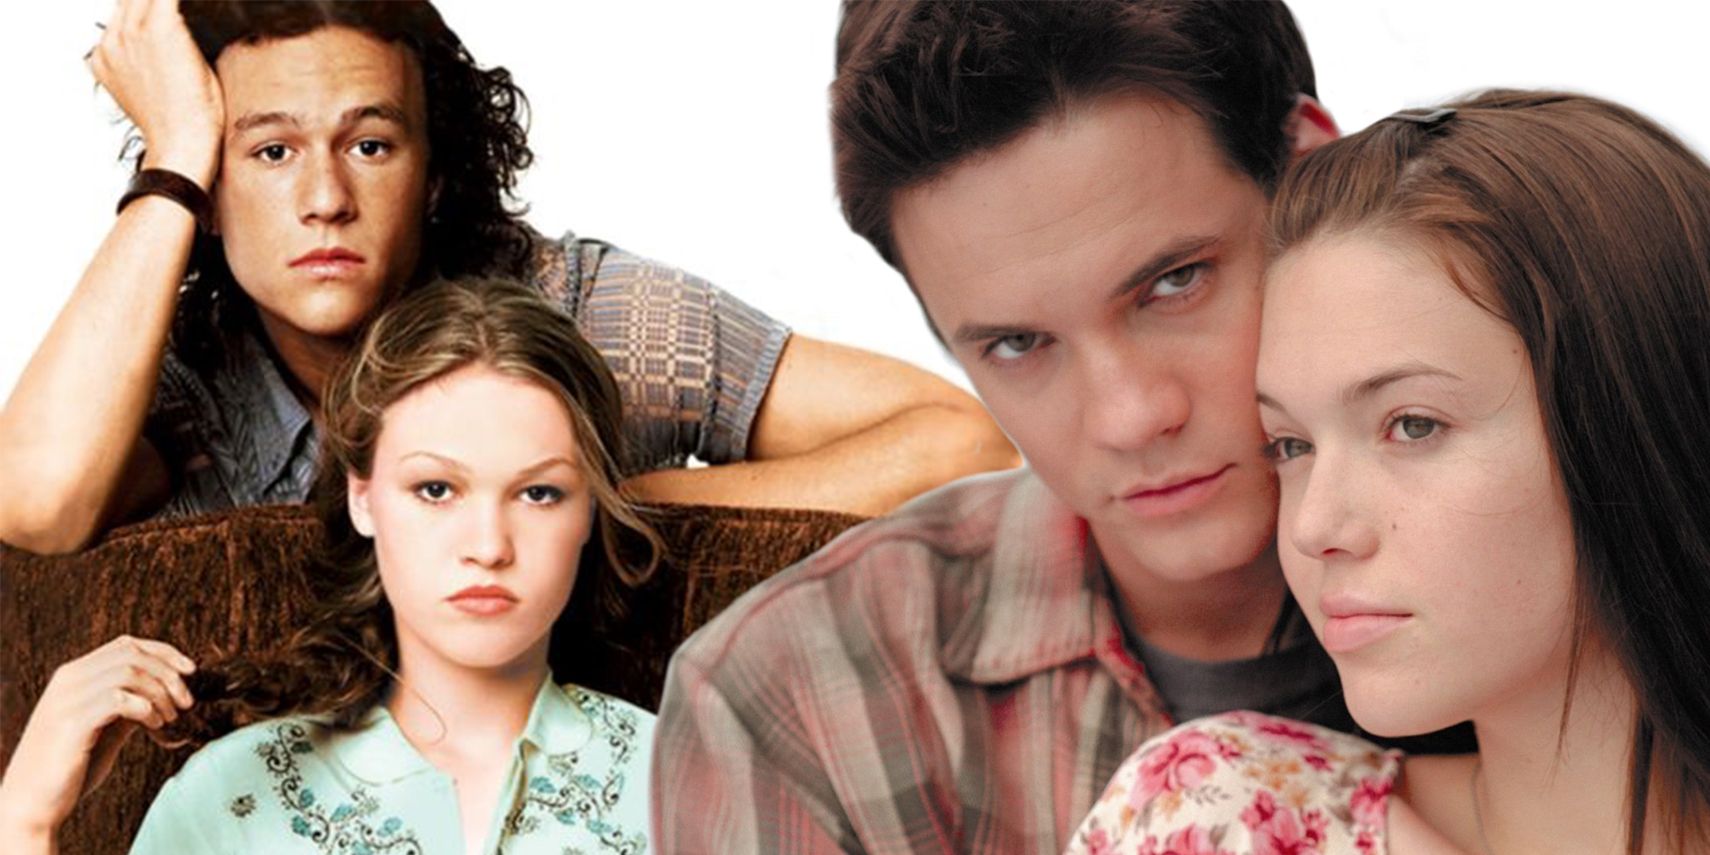 20 Unforgettable Teen Romance Movies From The 90s & 2000s